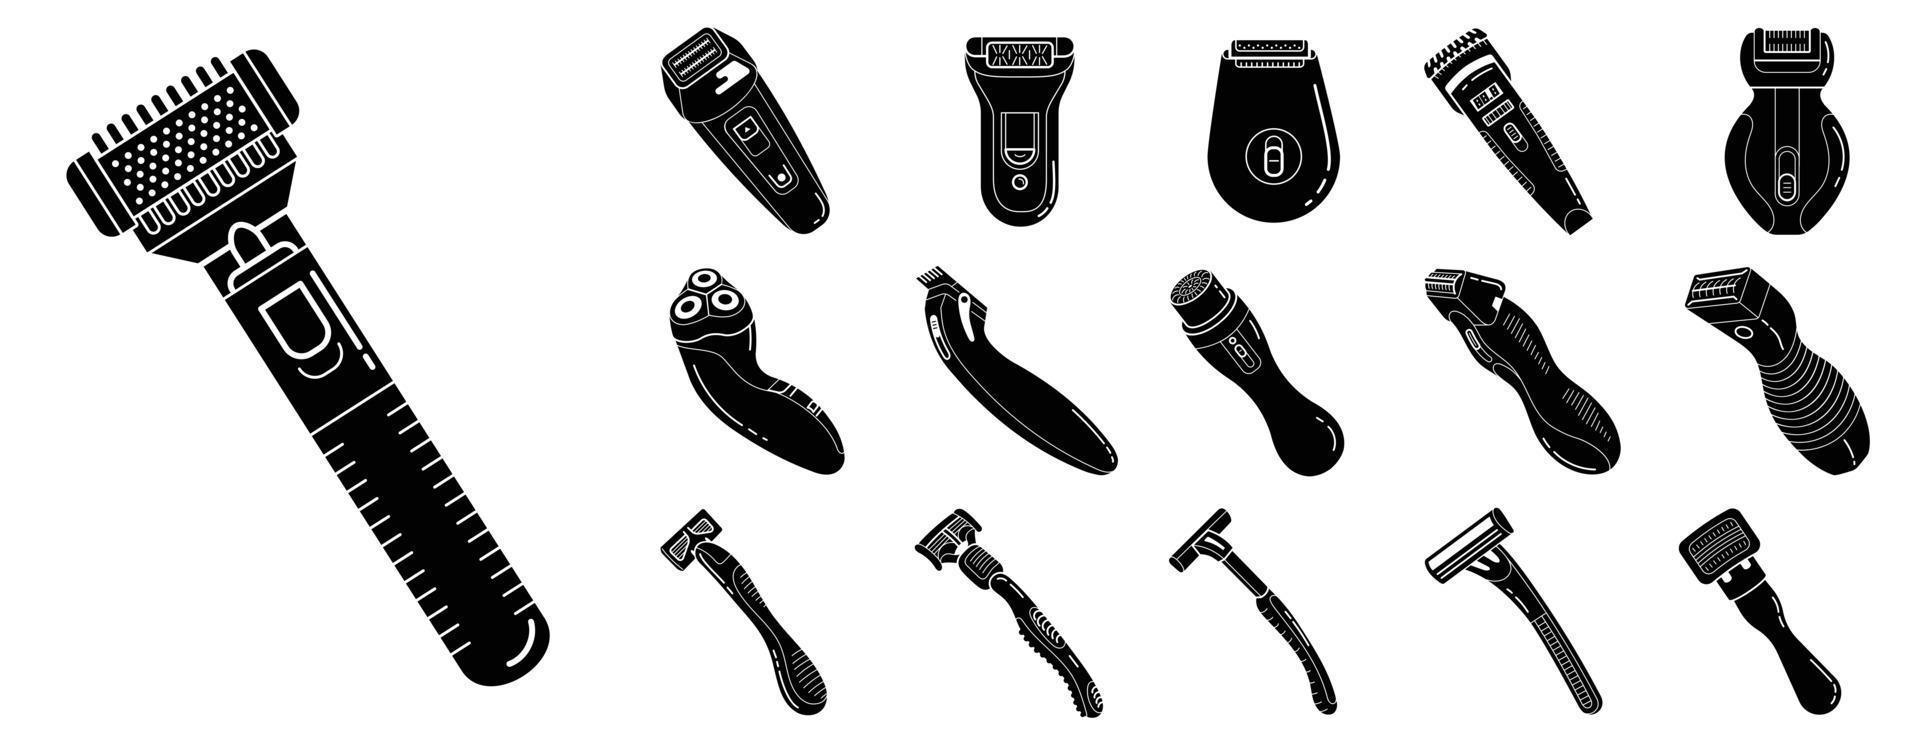 Shaver icon set, simple style vector